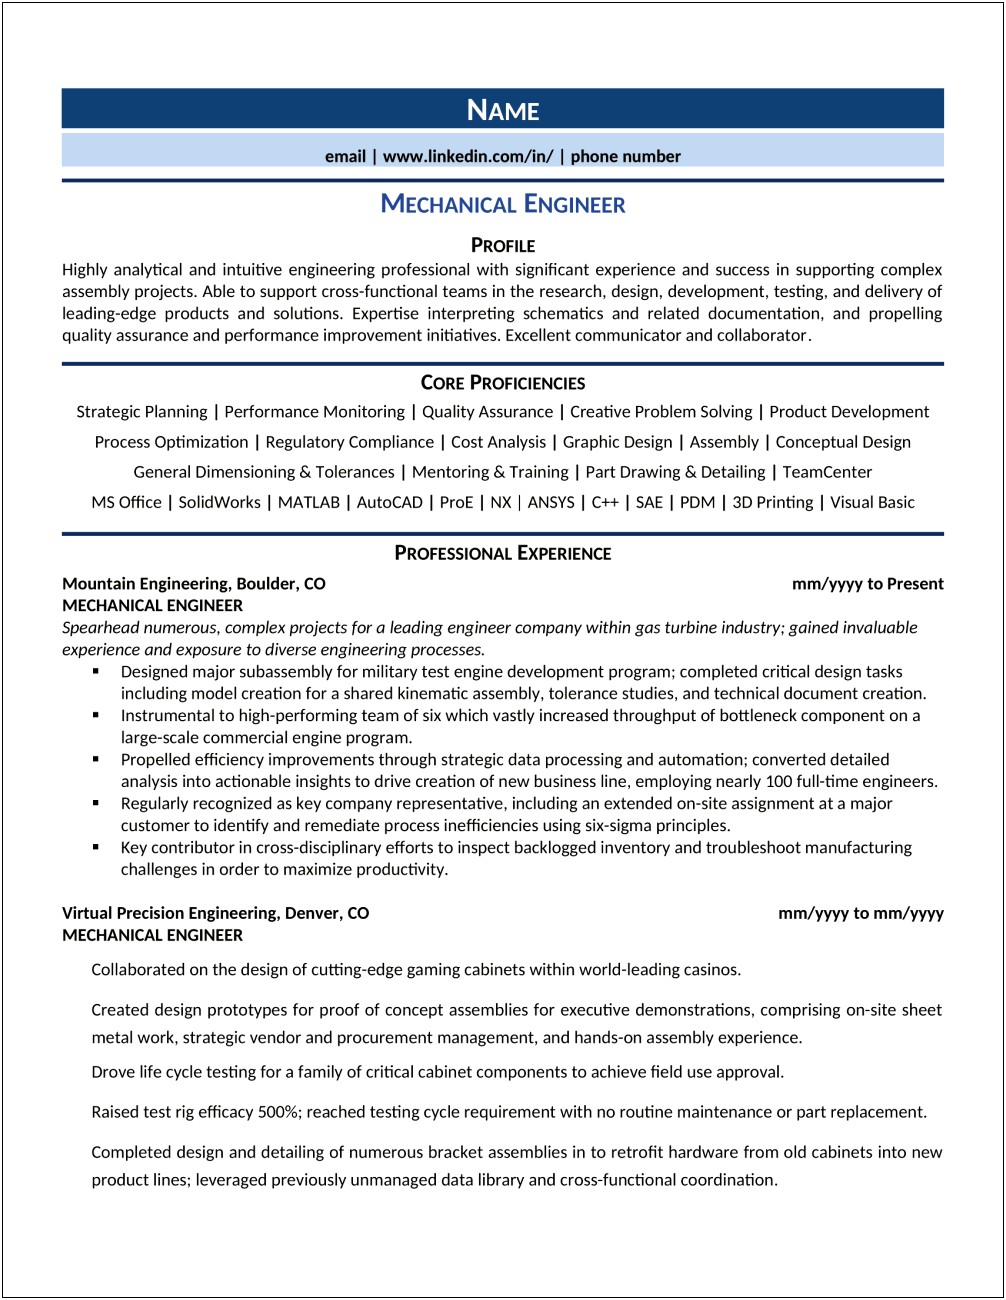 Sample Of Objective For Engineer Resume